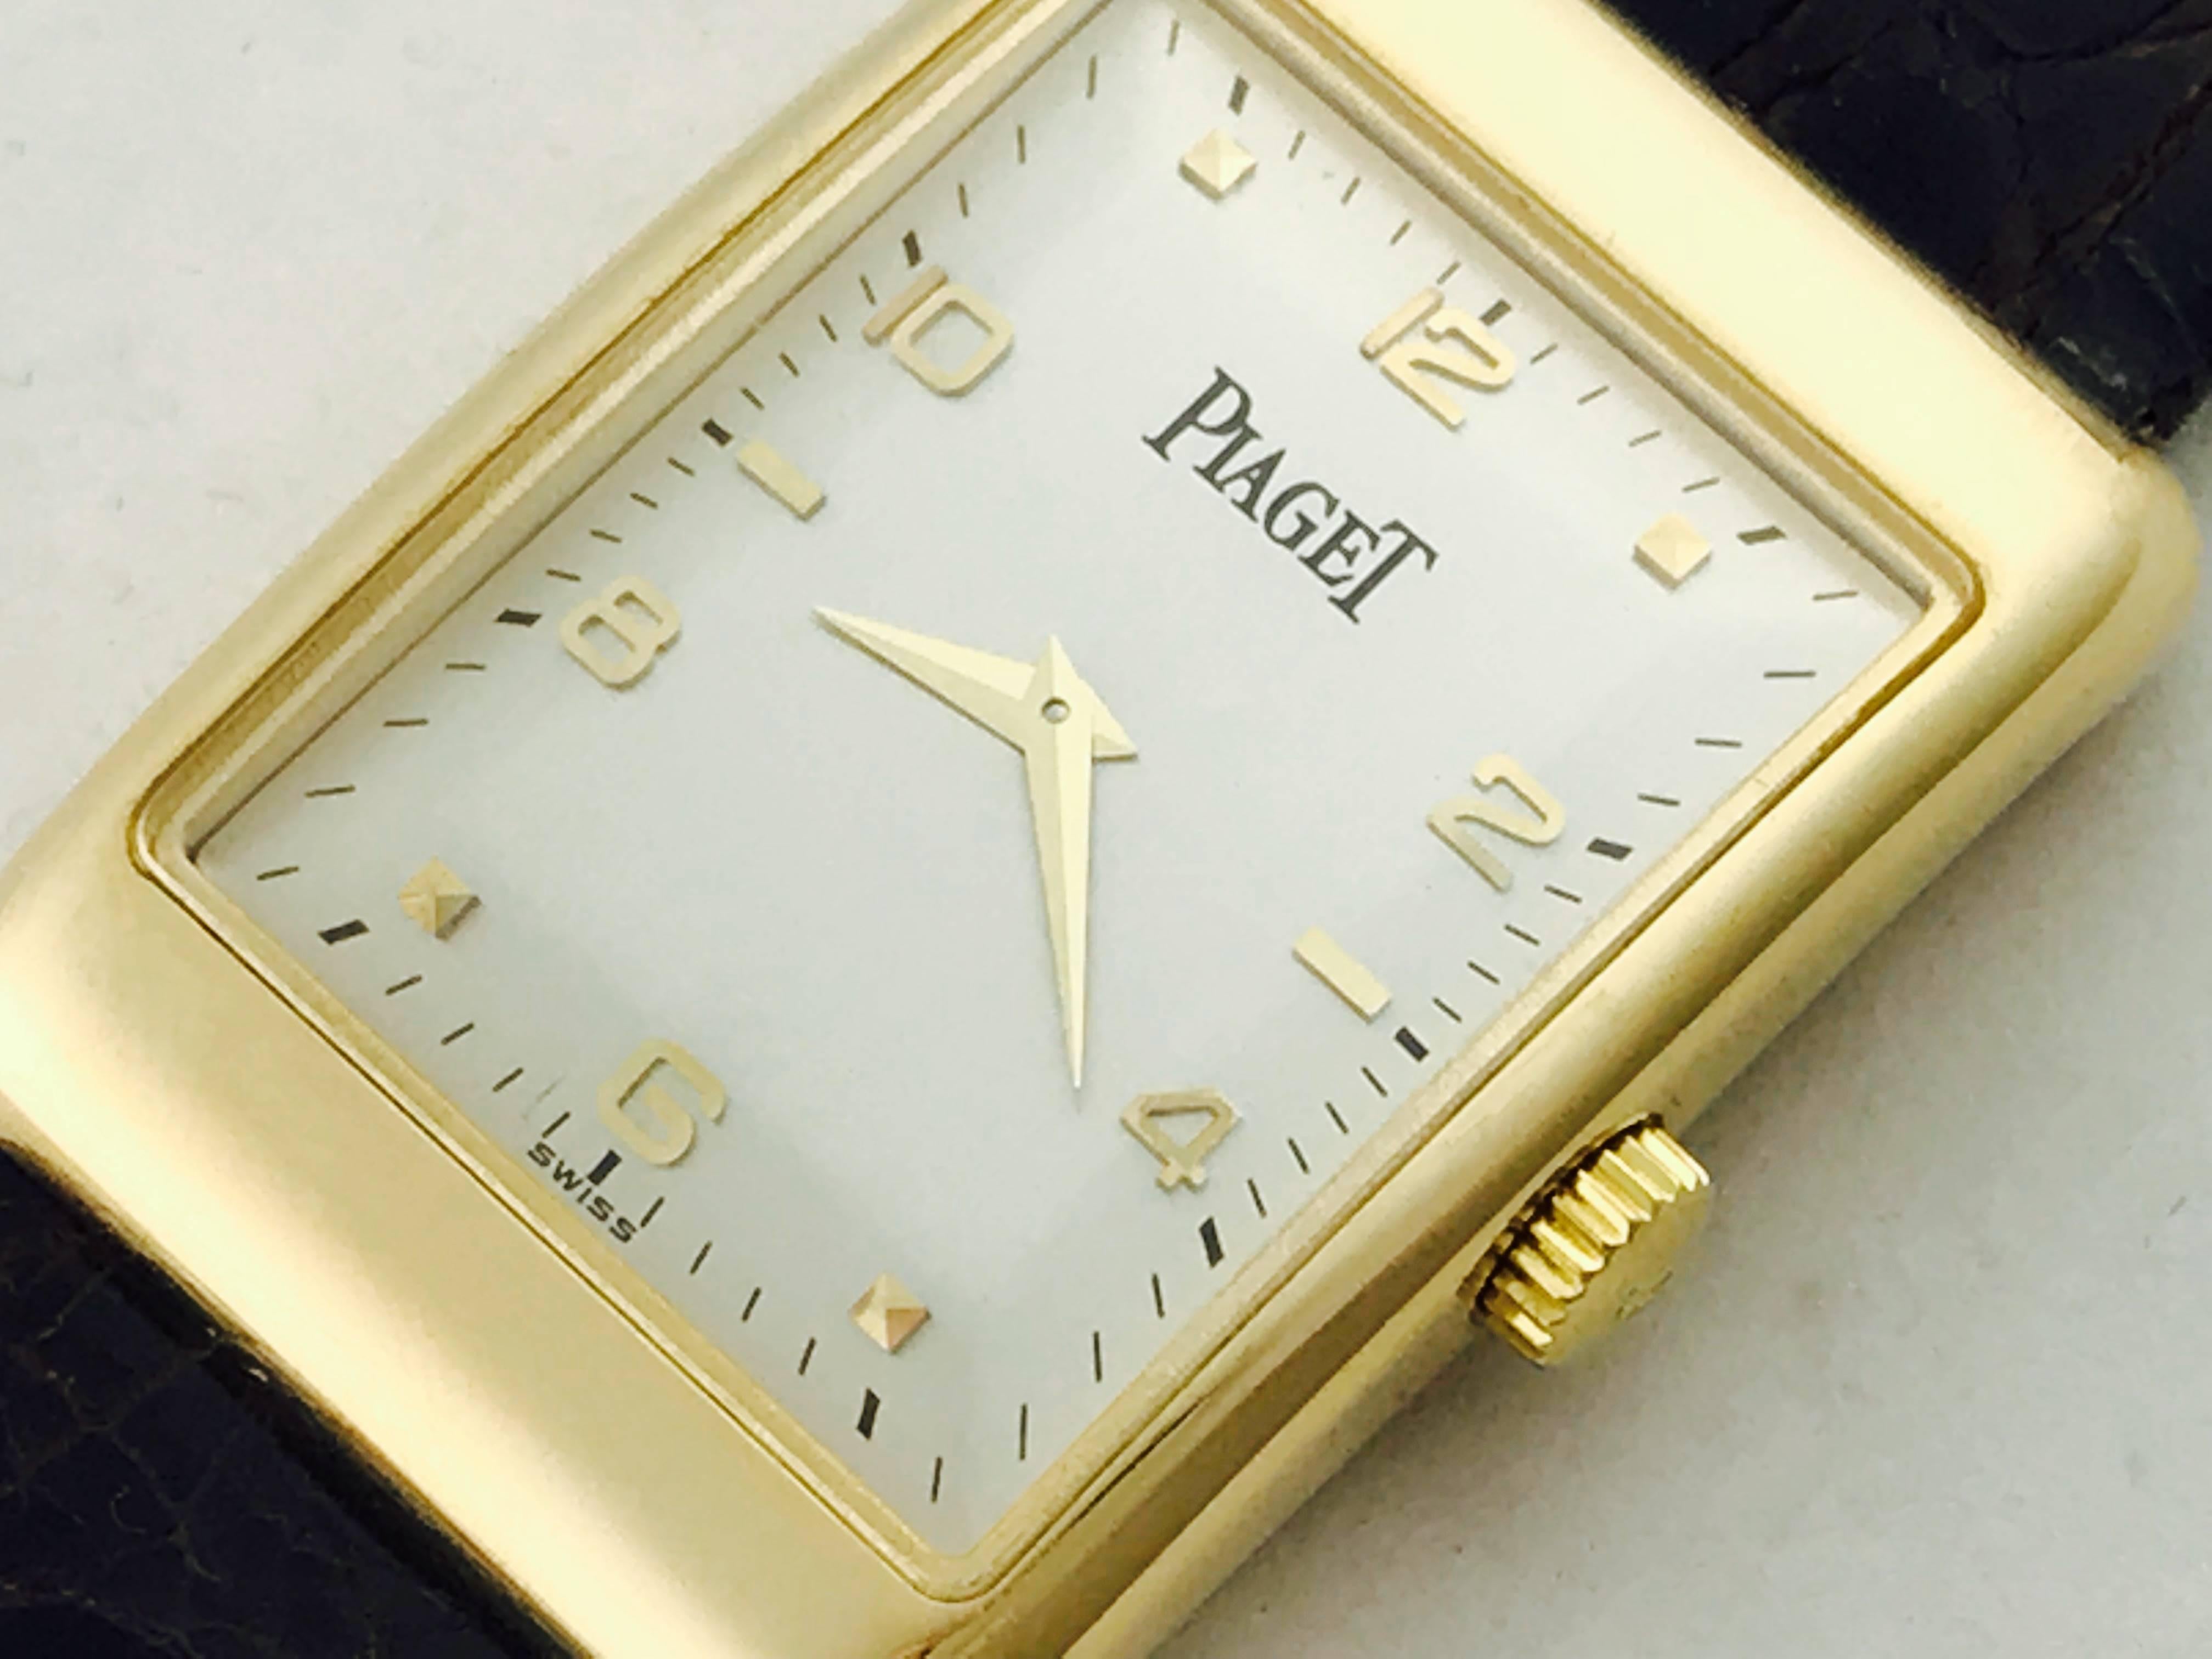 Piaget Mens 18k yellow gold manual wind strap wrist watch. 18k Yellow Gold rectangular style case (24x35mm), Dark brown alligator strap with 18k yellow gold Piaget buckle,  Silvered Dial with yellow gold hour markers and Arabic numerals. Certified